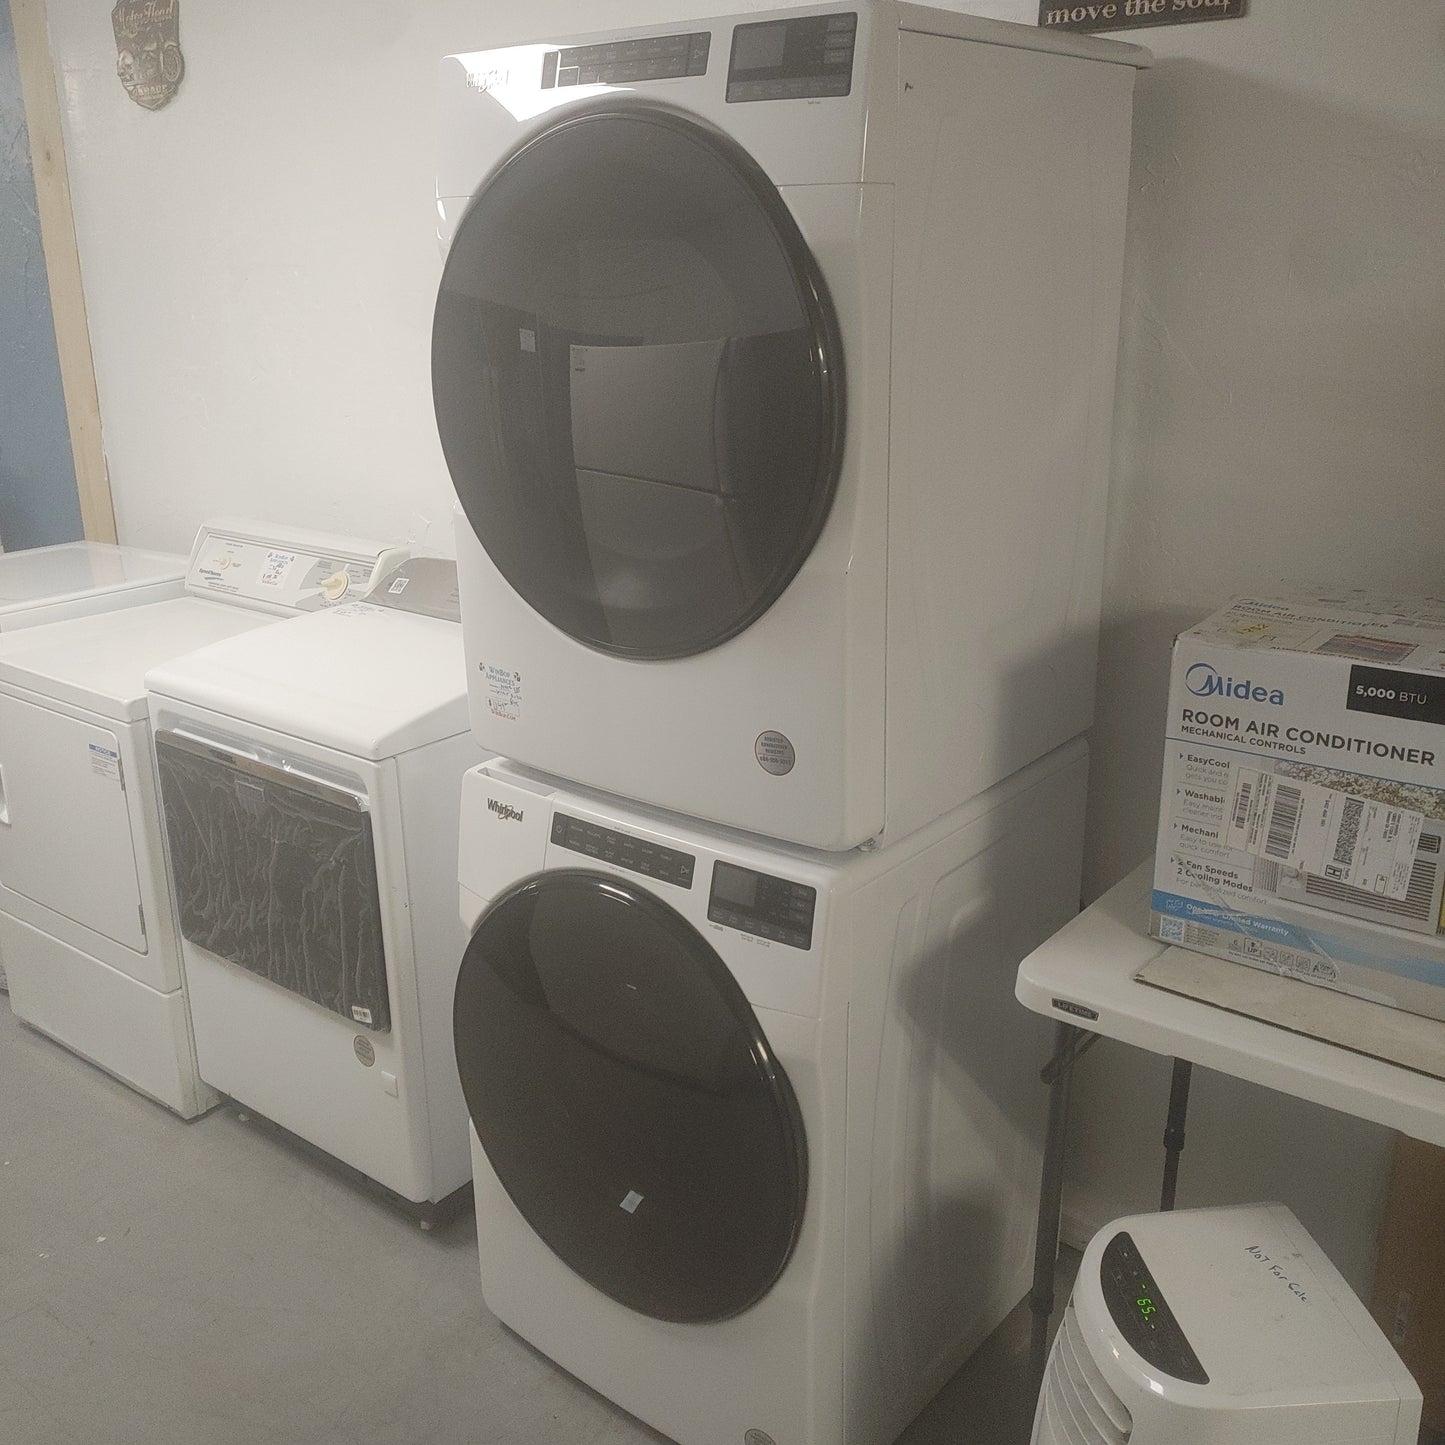 New Whirlpool 4.5 cubic ft Front Load Washer and 7.4 cubic ft stackable Electric Dryer Set. Available in gas or electric?